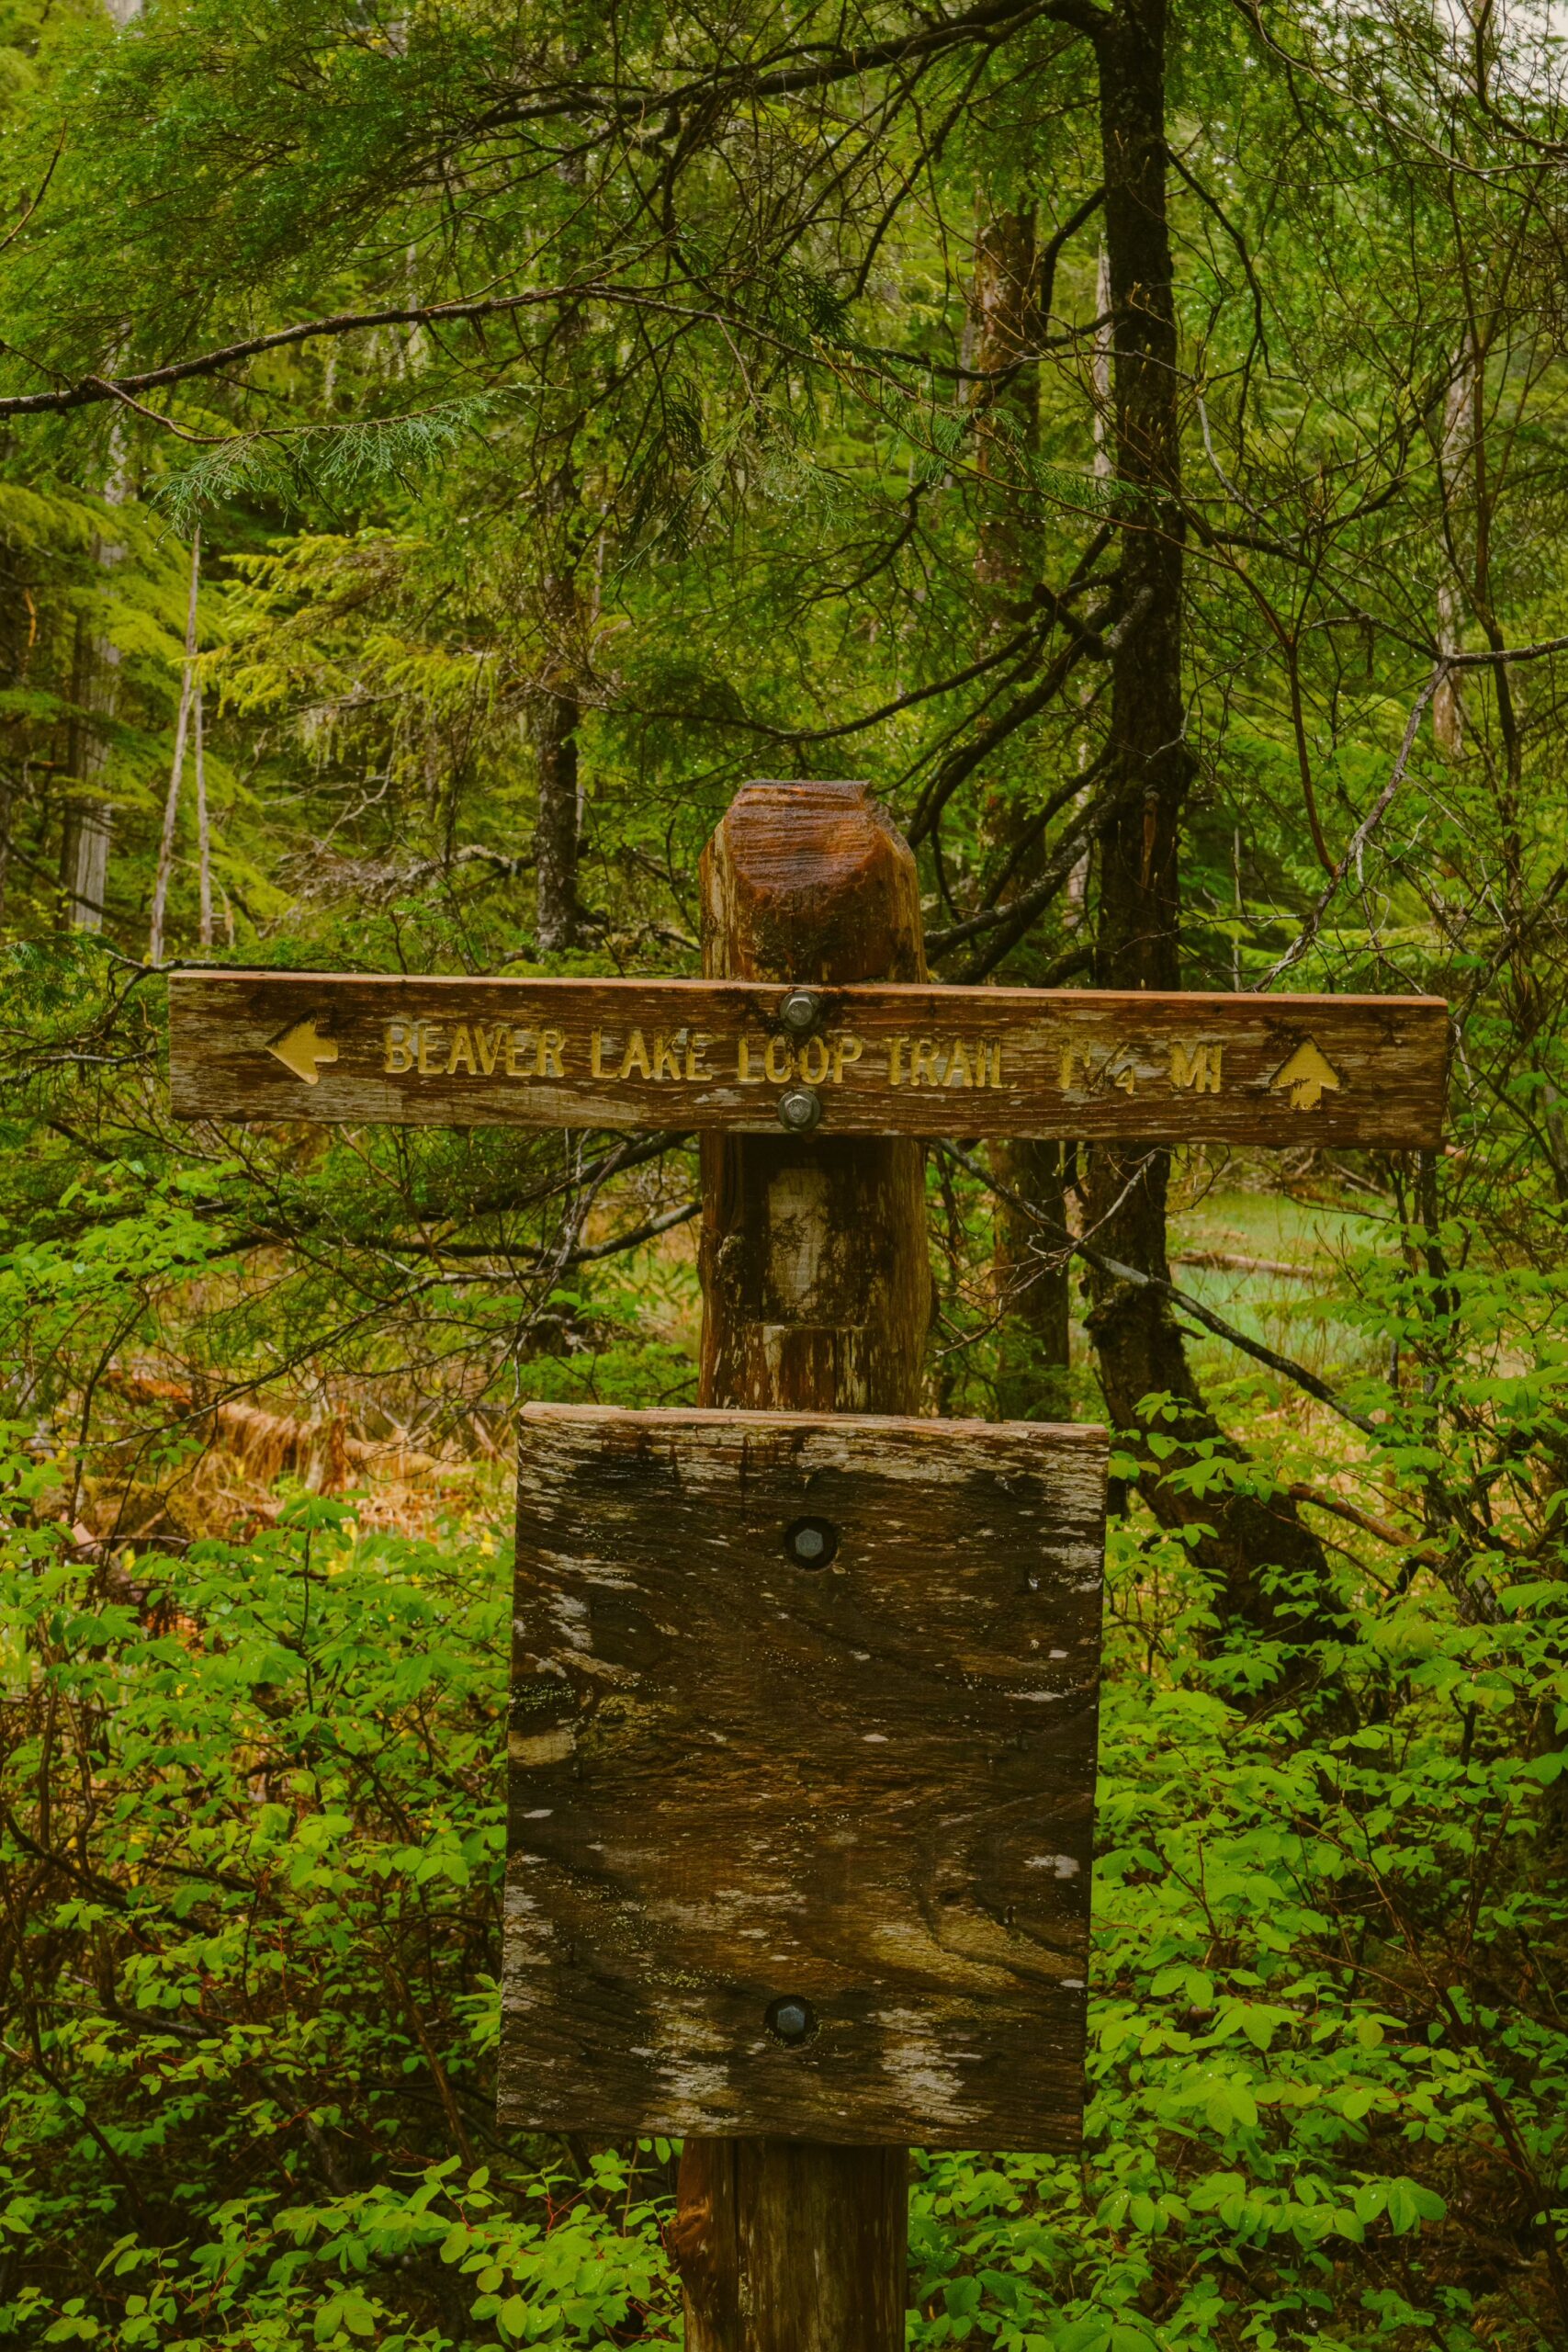 An image of the Beaver Lake Loop Trail trailsign.